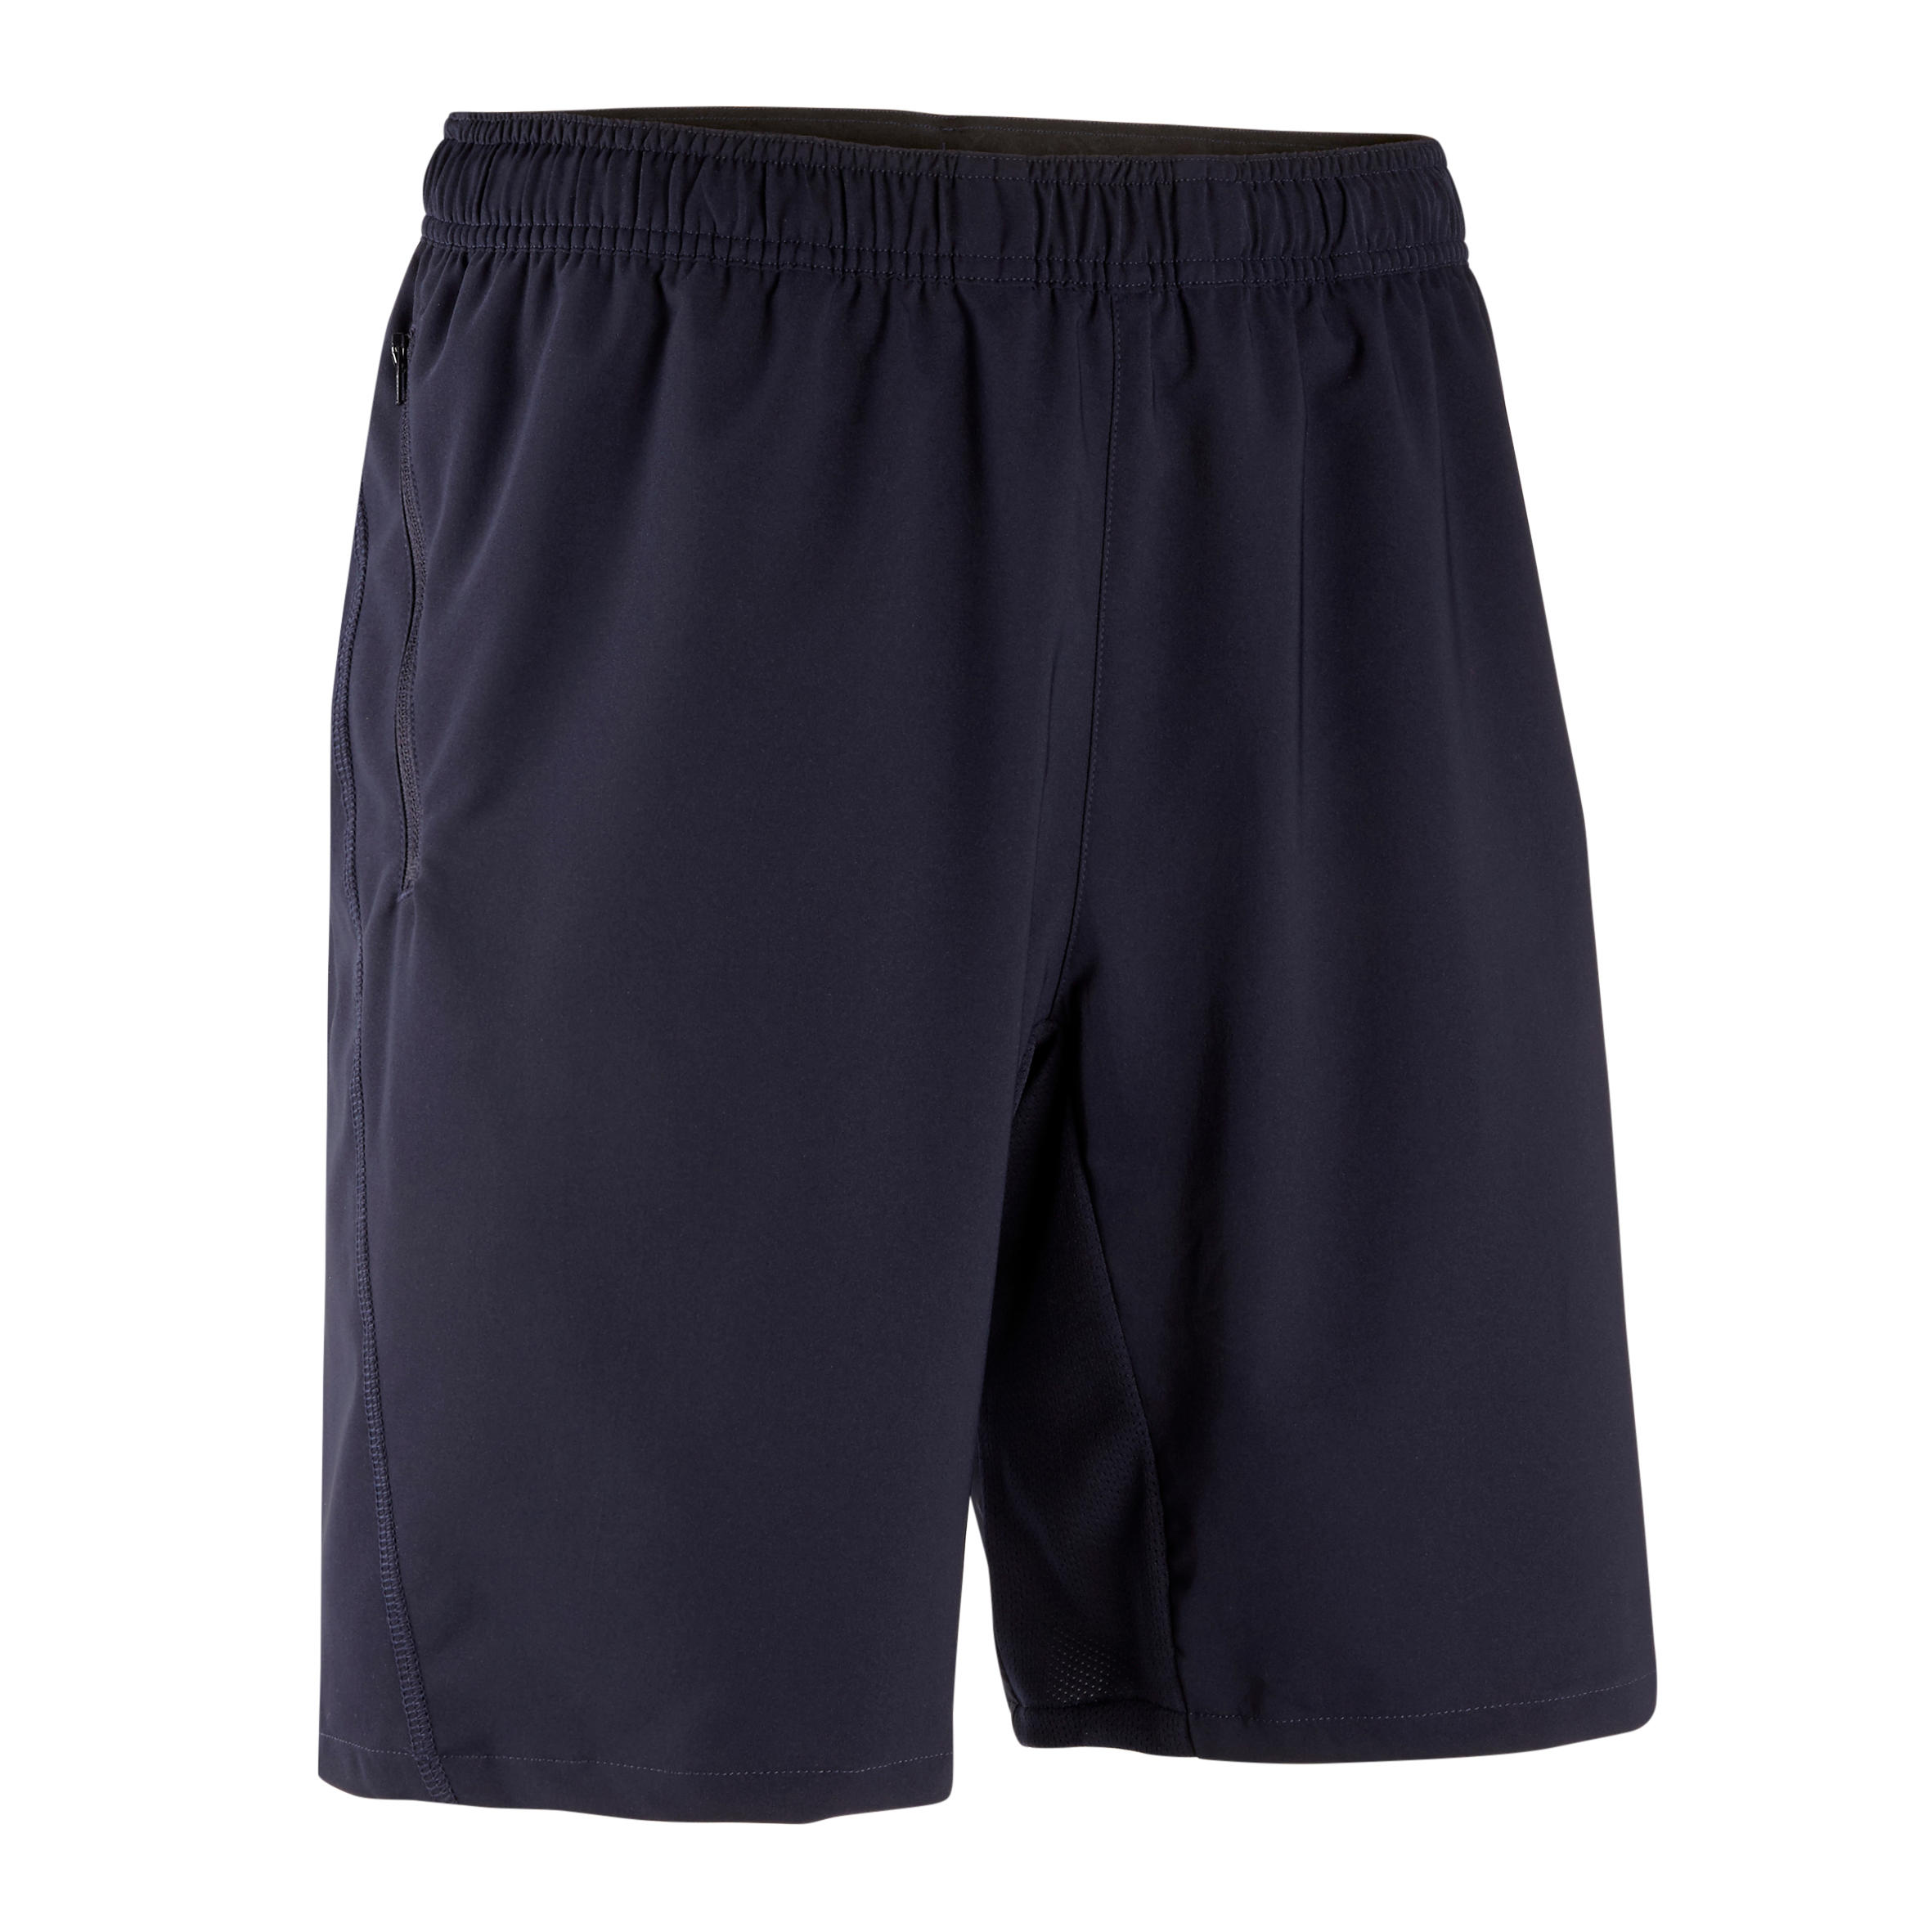 15 Incredible Cotton Gym Shorts With Pockets For 2023